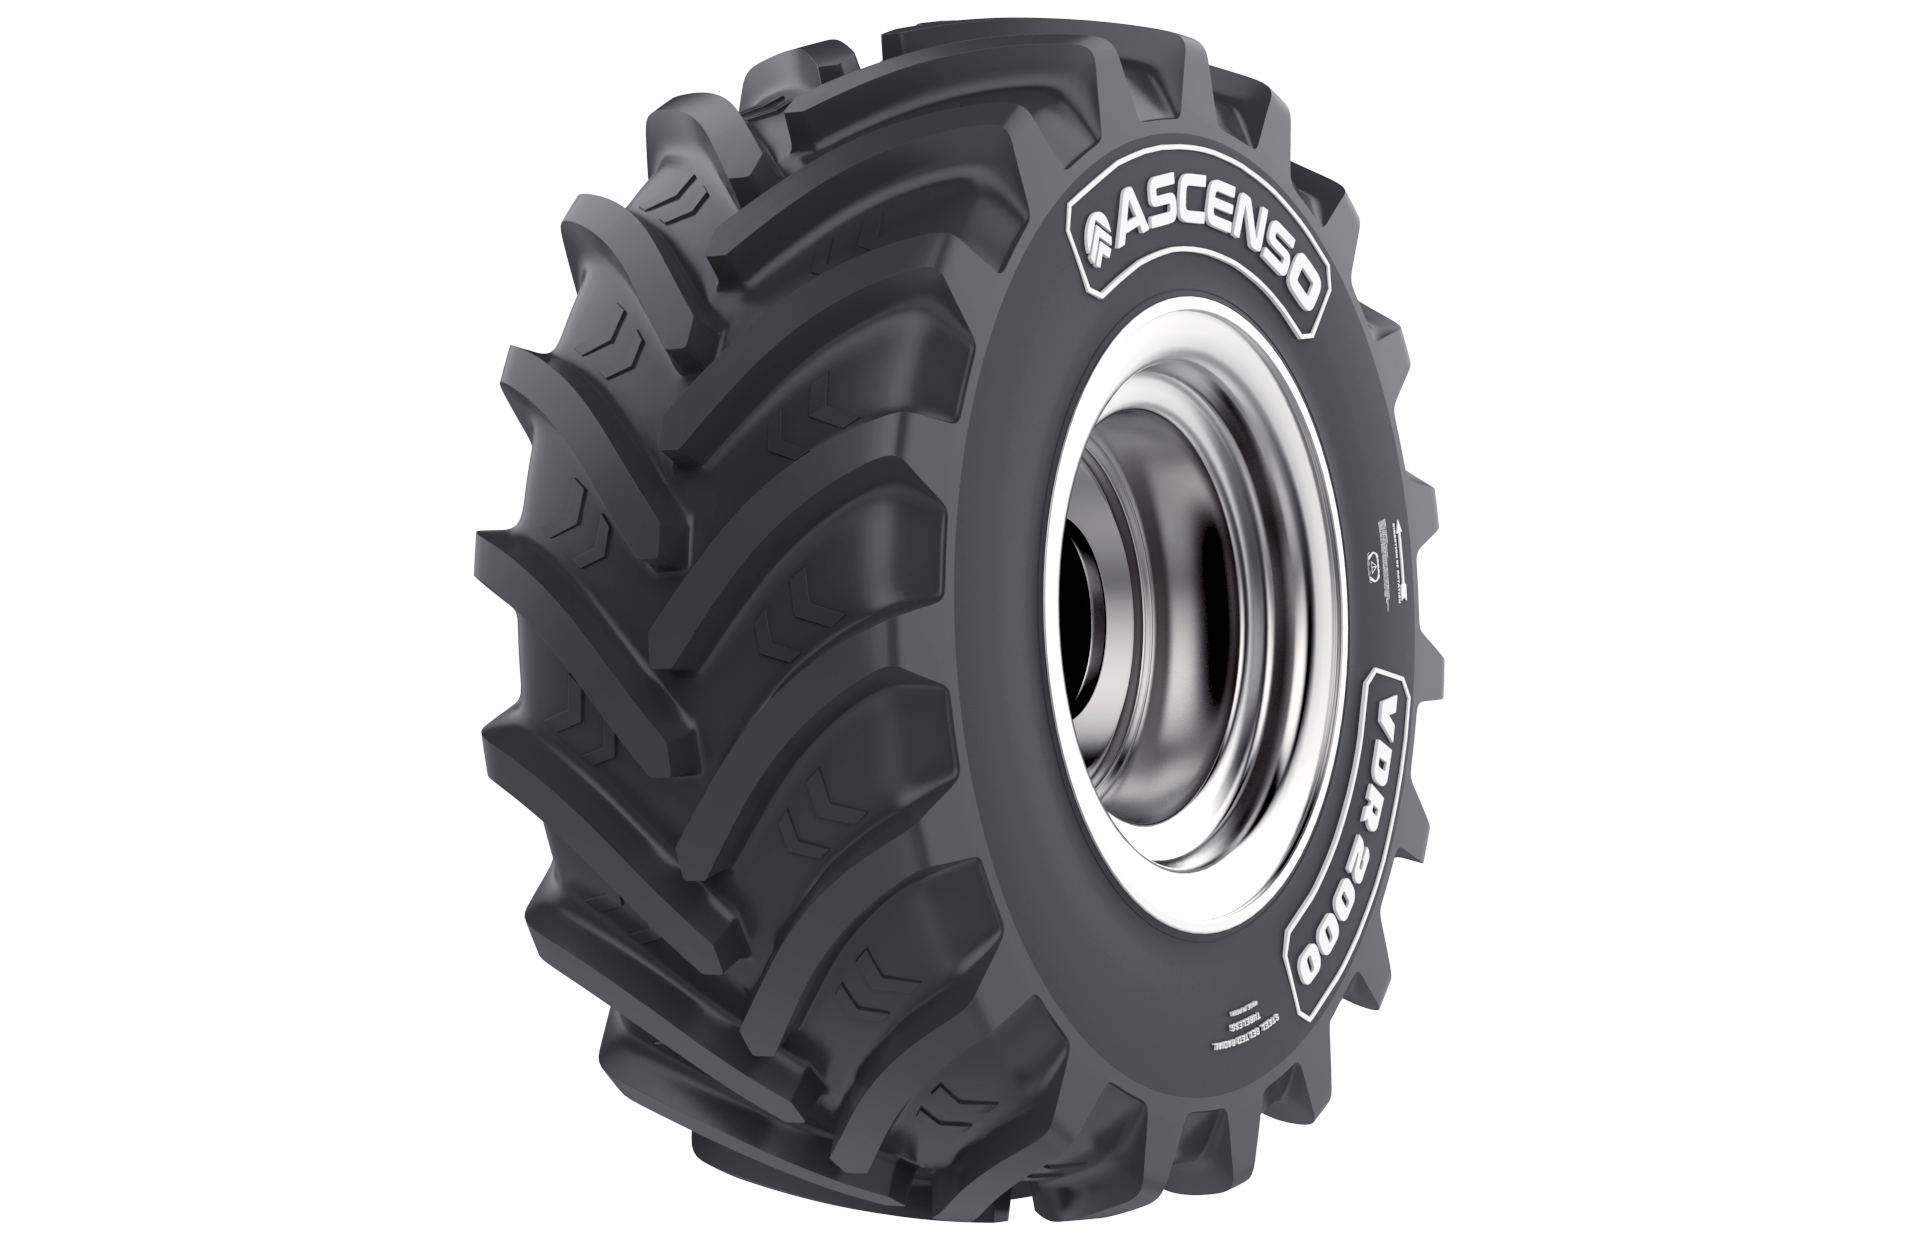 ASCENSO VF 650/65R42 NRO 174D R1-W TL VDR2000 STEEL BELTED